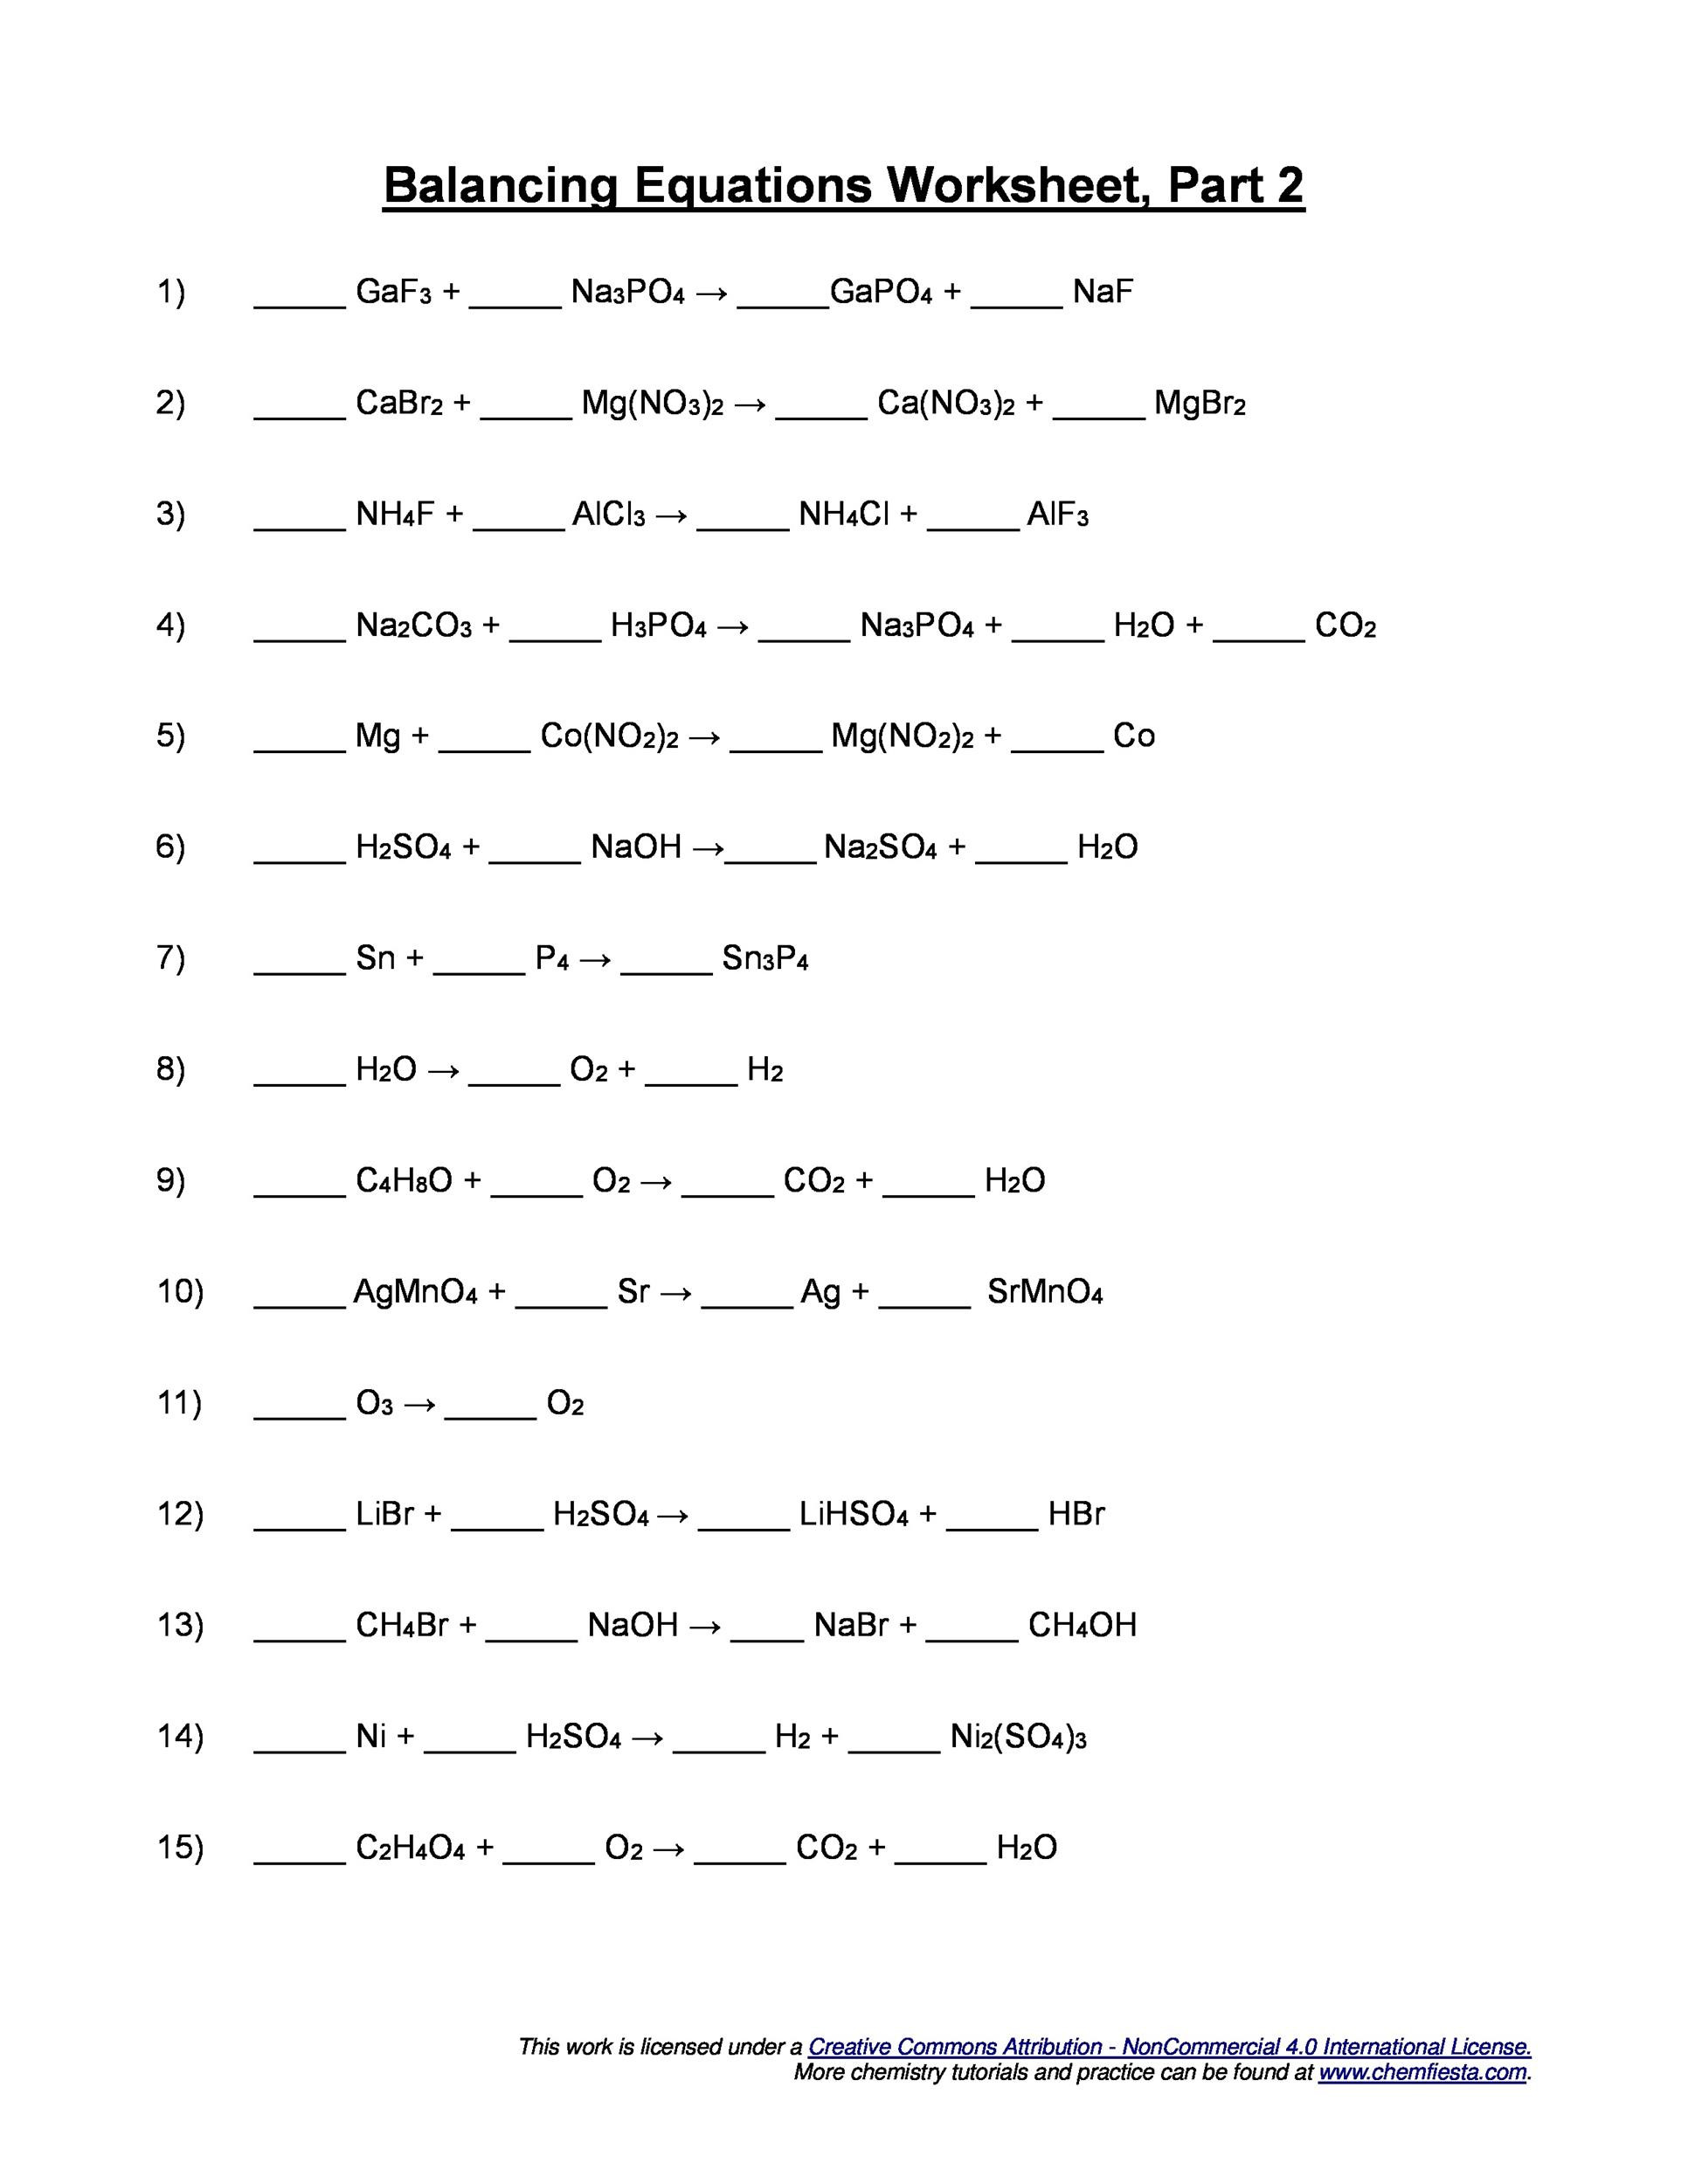 Counting atoms Worksheet Answers 49 Balancing Chemical Equations Worksheets [with Answers]